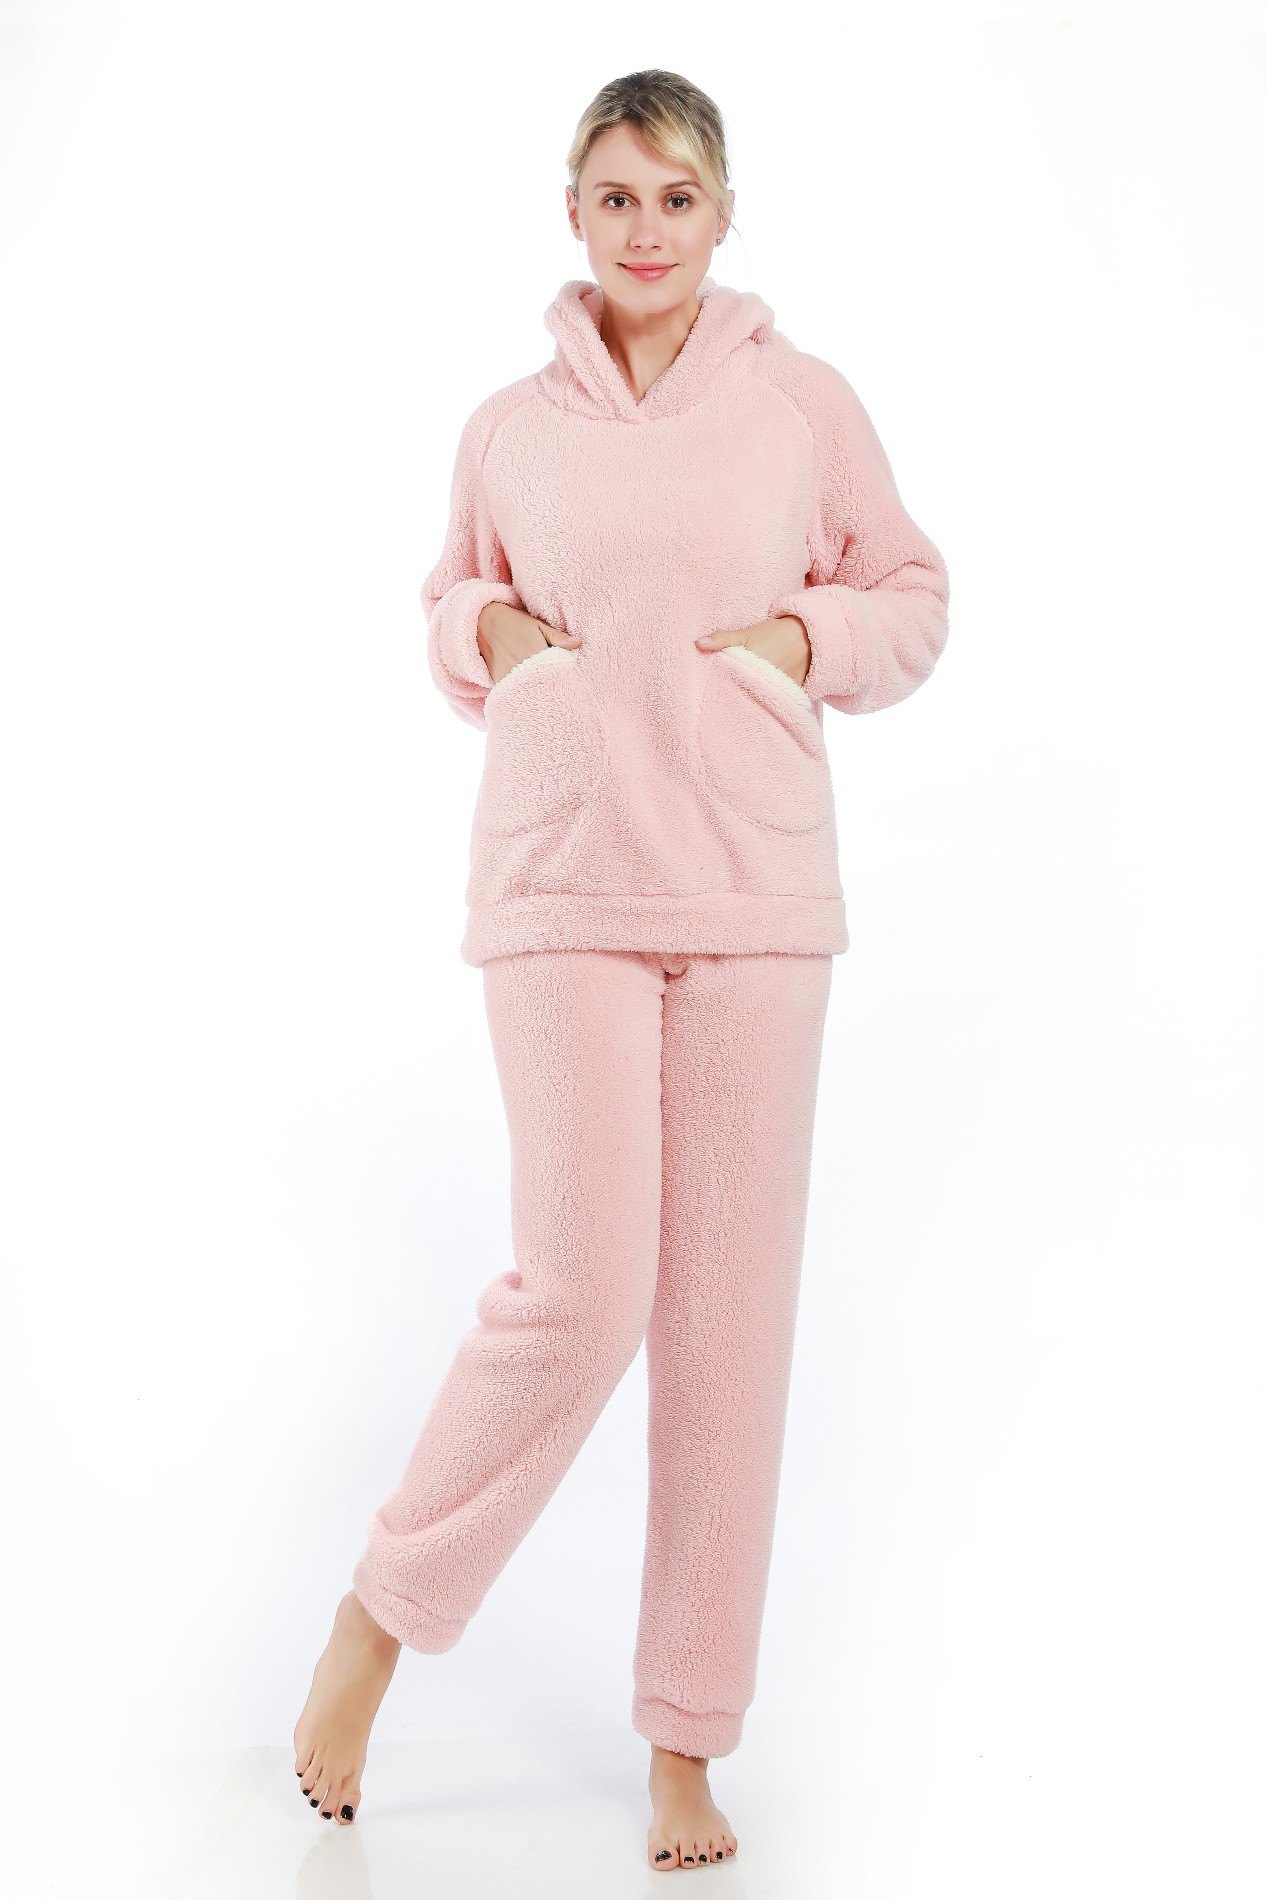 Kupte Hooded solid color women's pajamas set,Hooded solid color women's pajamas set ceny. Hooded solid color women's pajamas set značky. Hooded solid color women's pajamas set Výrobce. Hooded solid color women's pajamas set citáty. Hooded solid color women's pajamas set společnost,